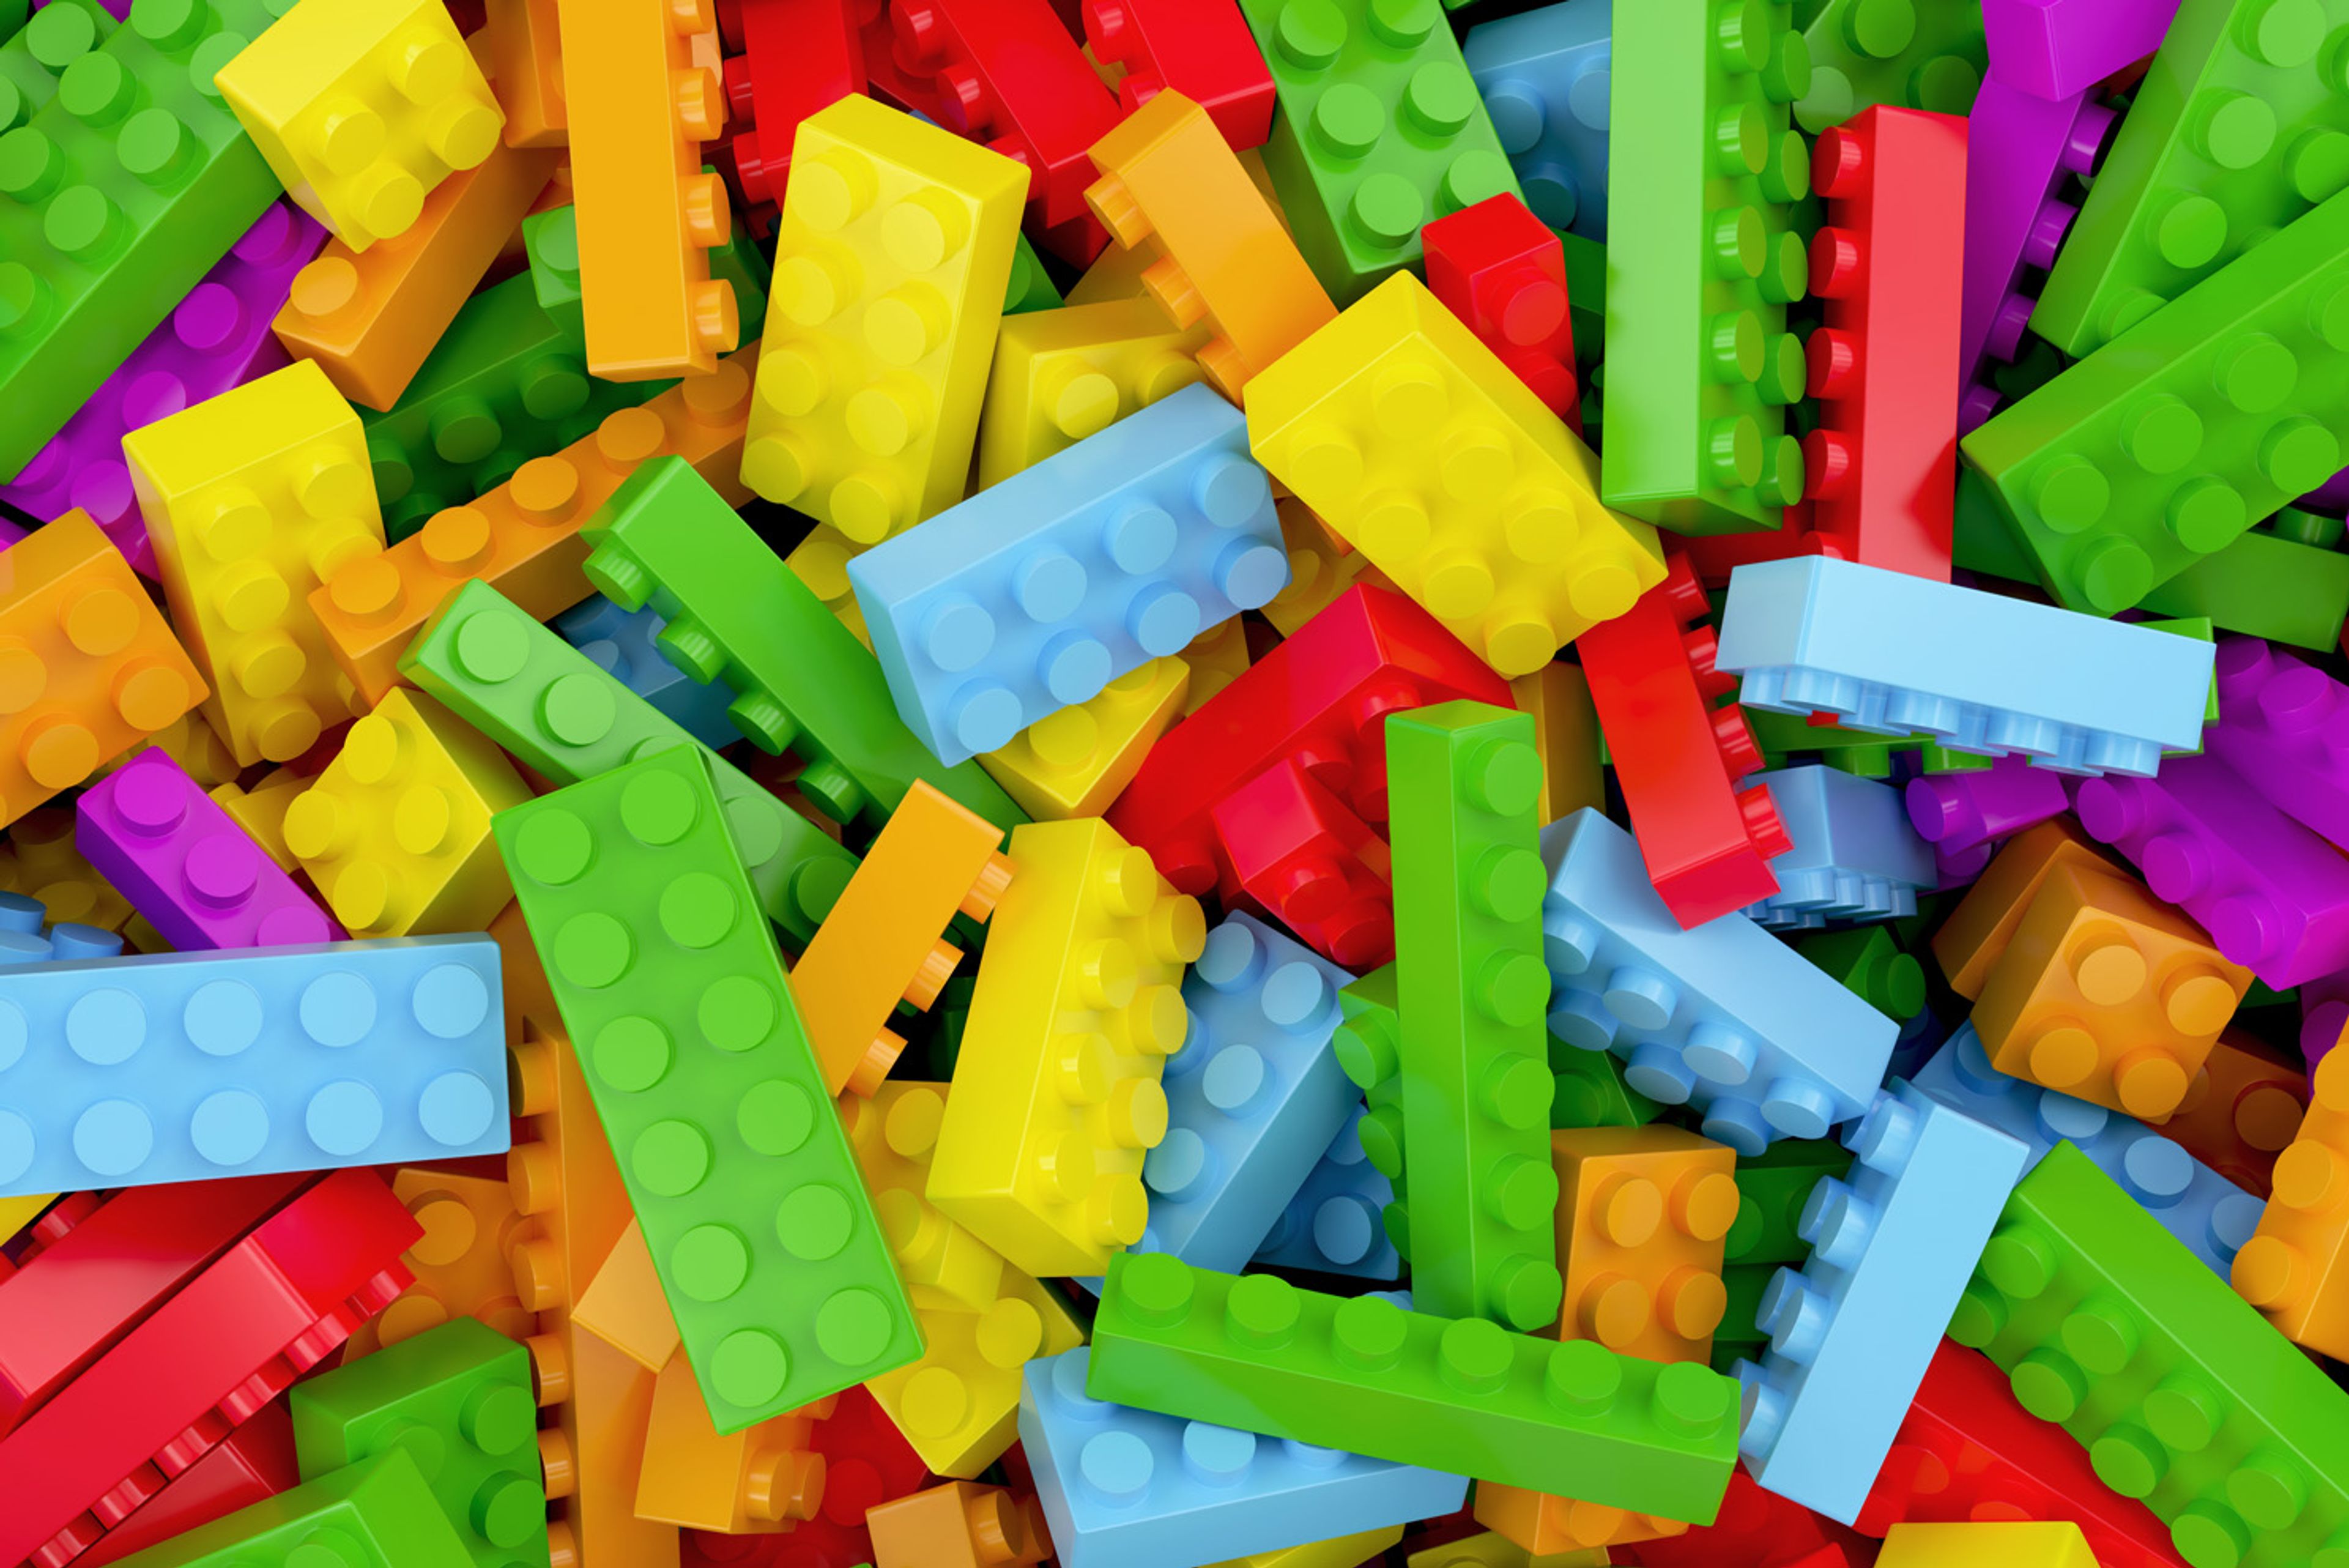 Image of Lego bricks in a pile